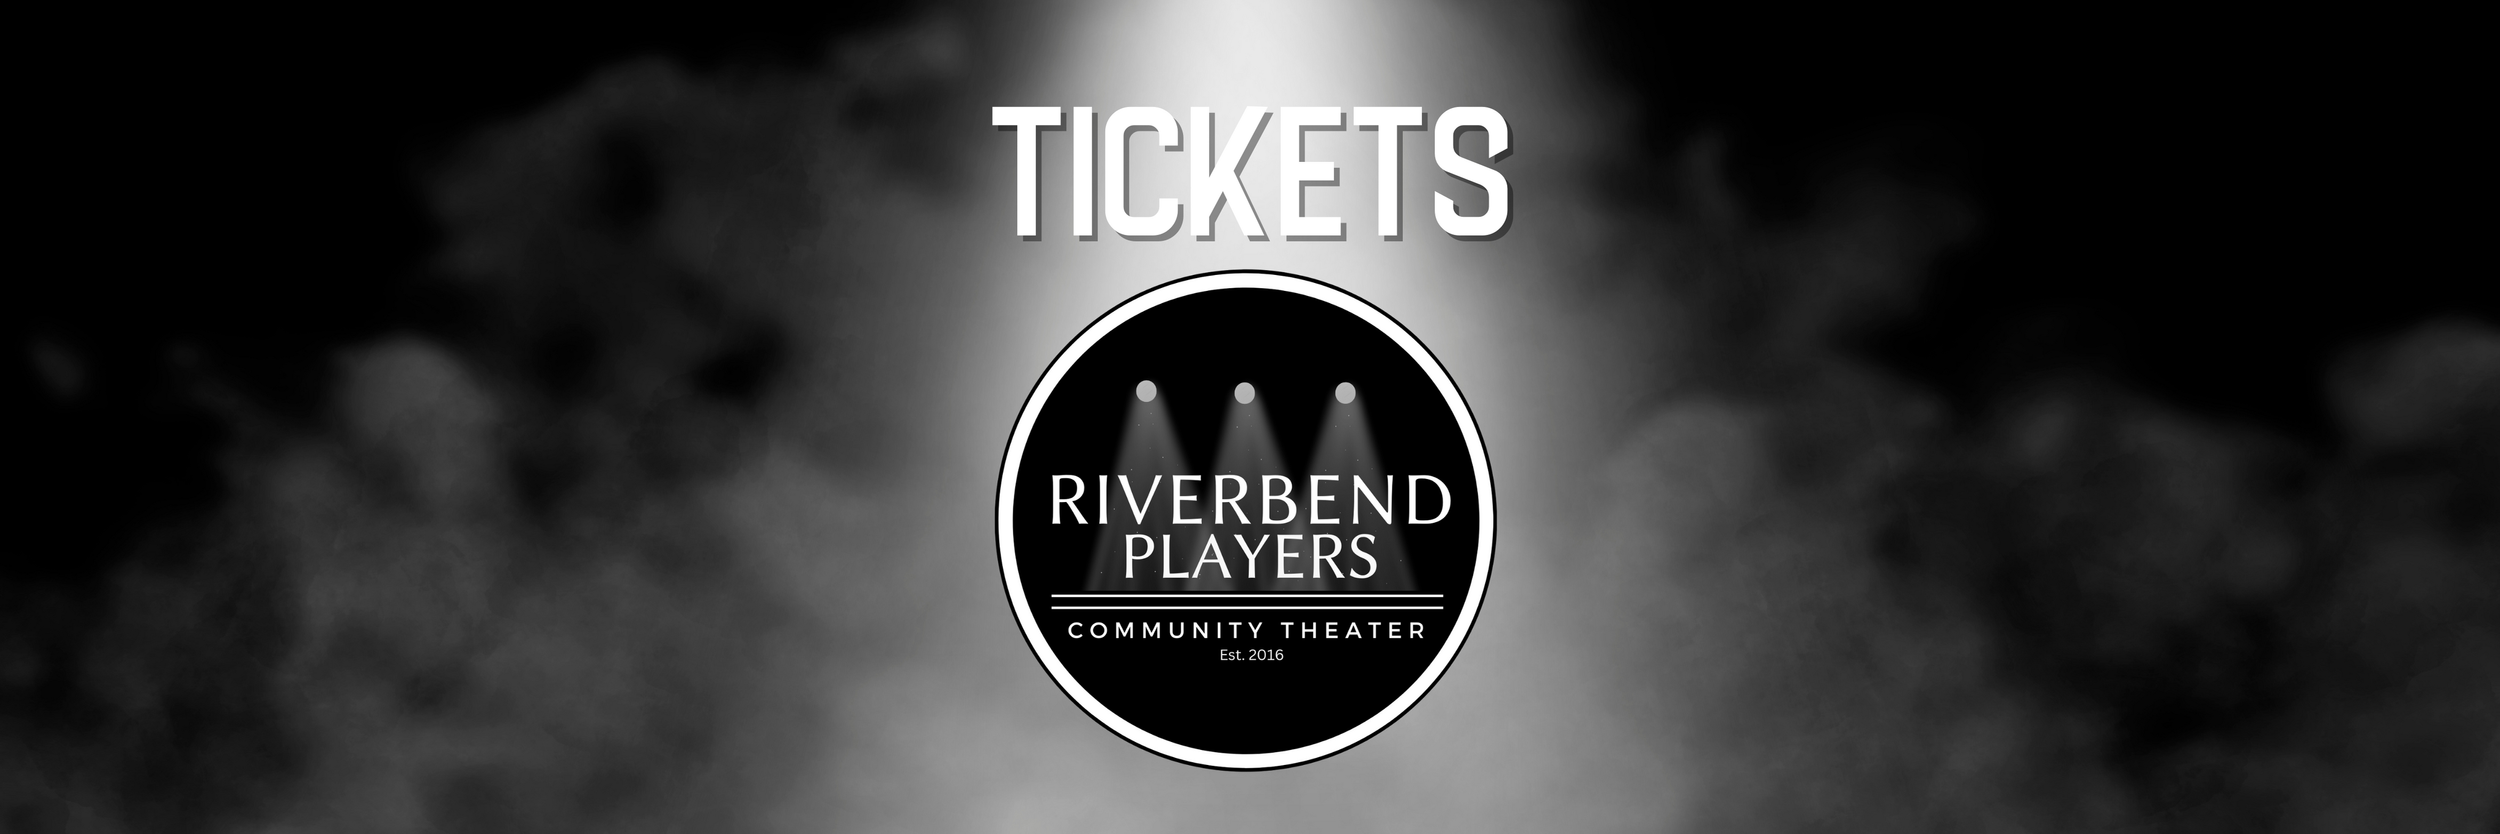 Tickets — Riverbend Players